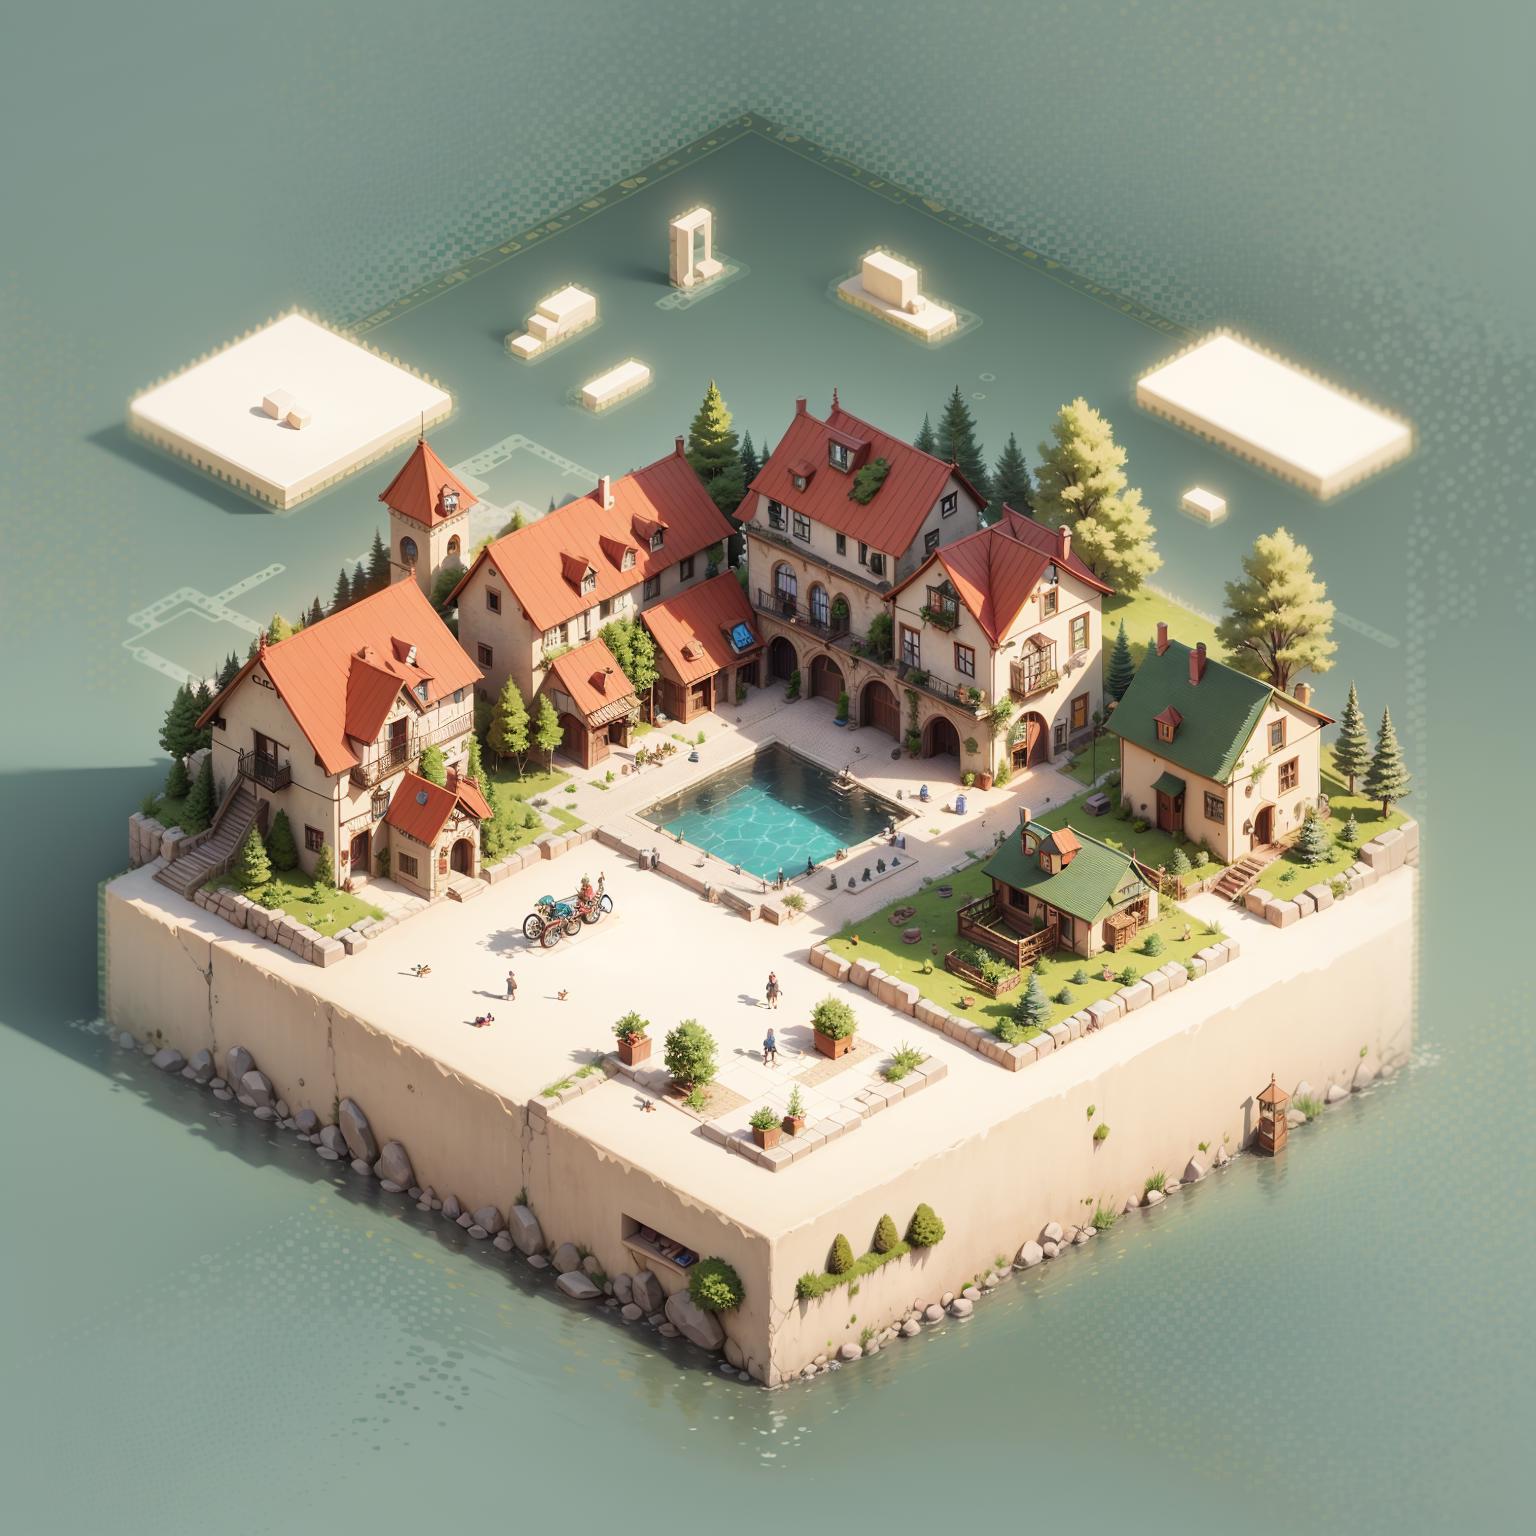 A 3D Model of a Town with a Swimming Pool and Boats